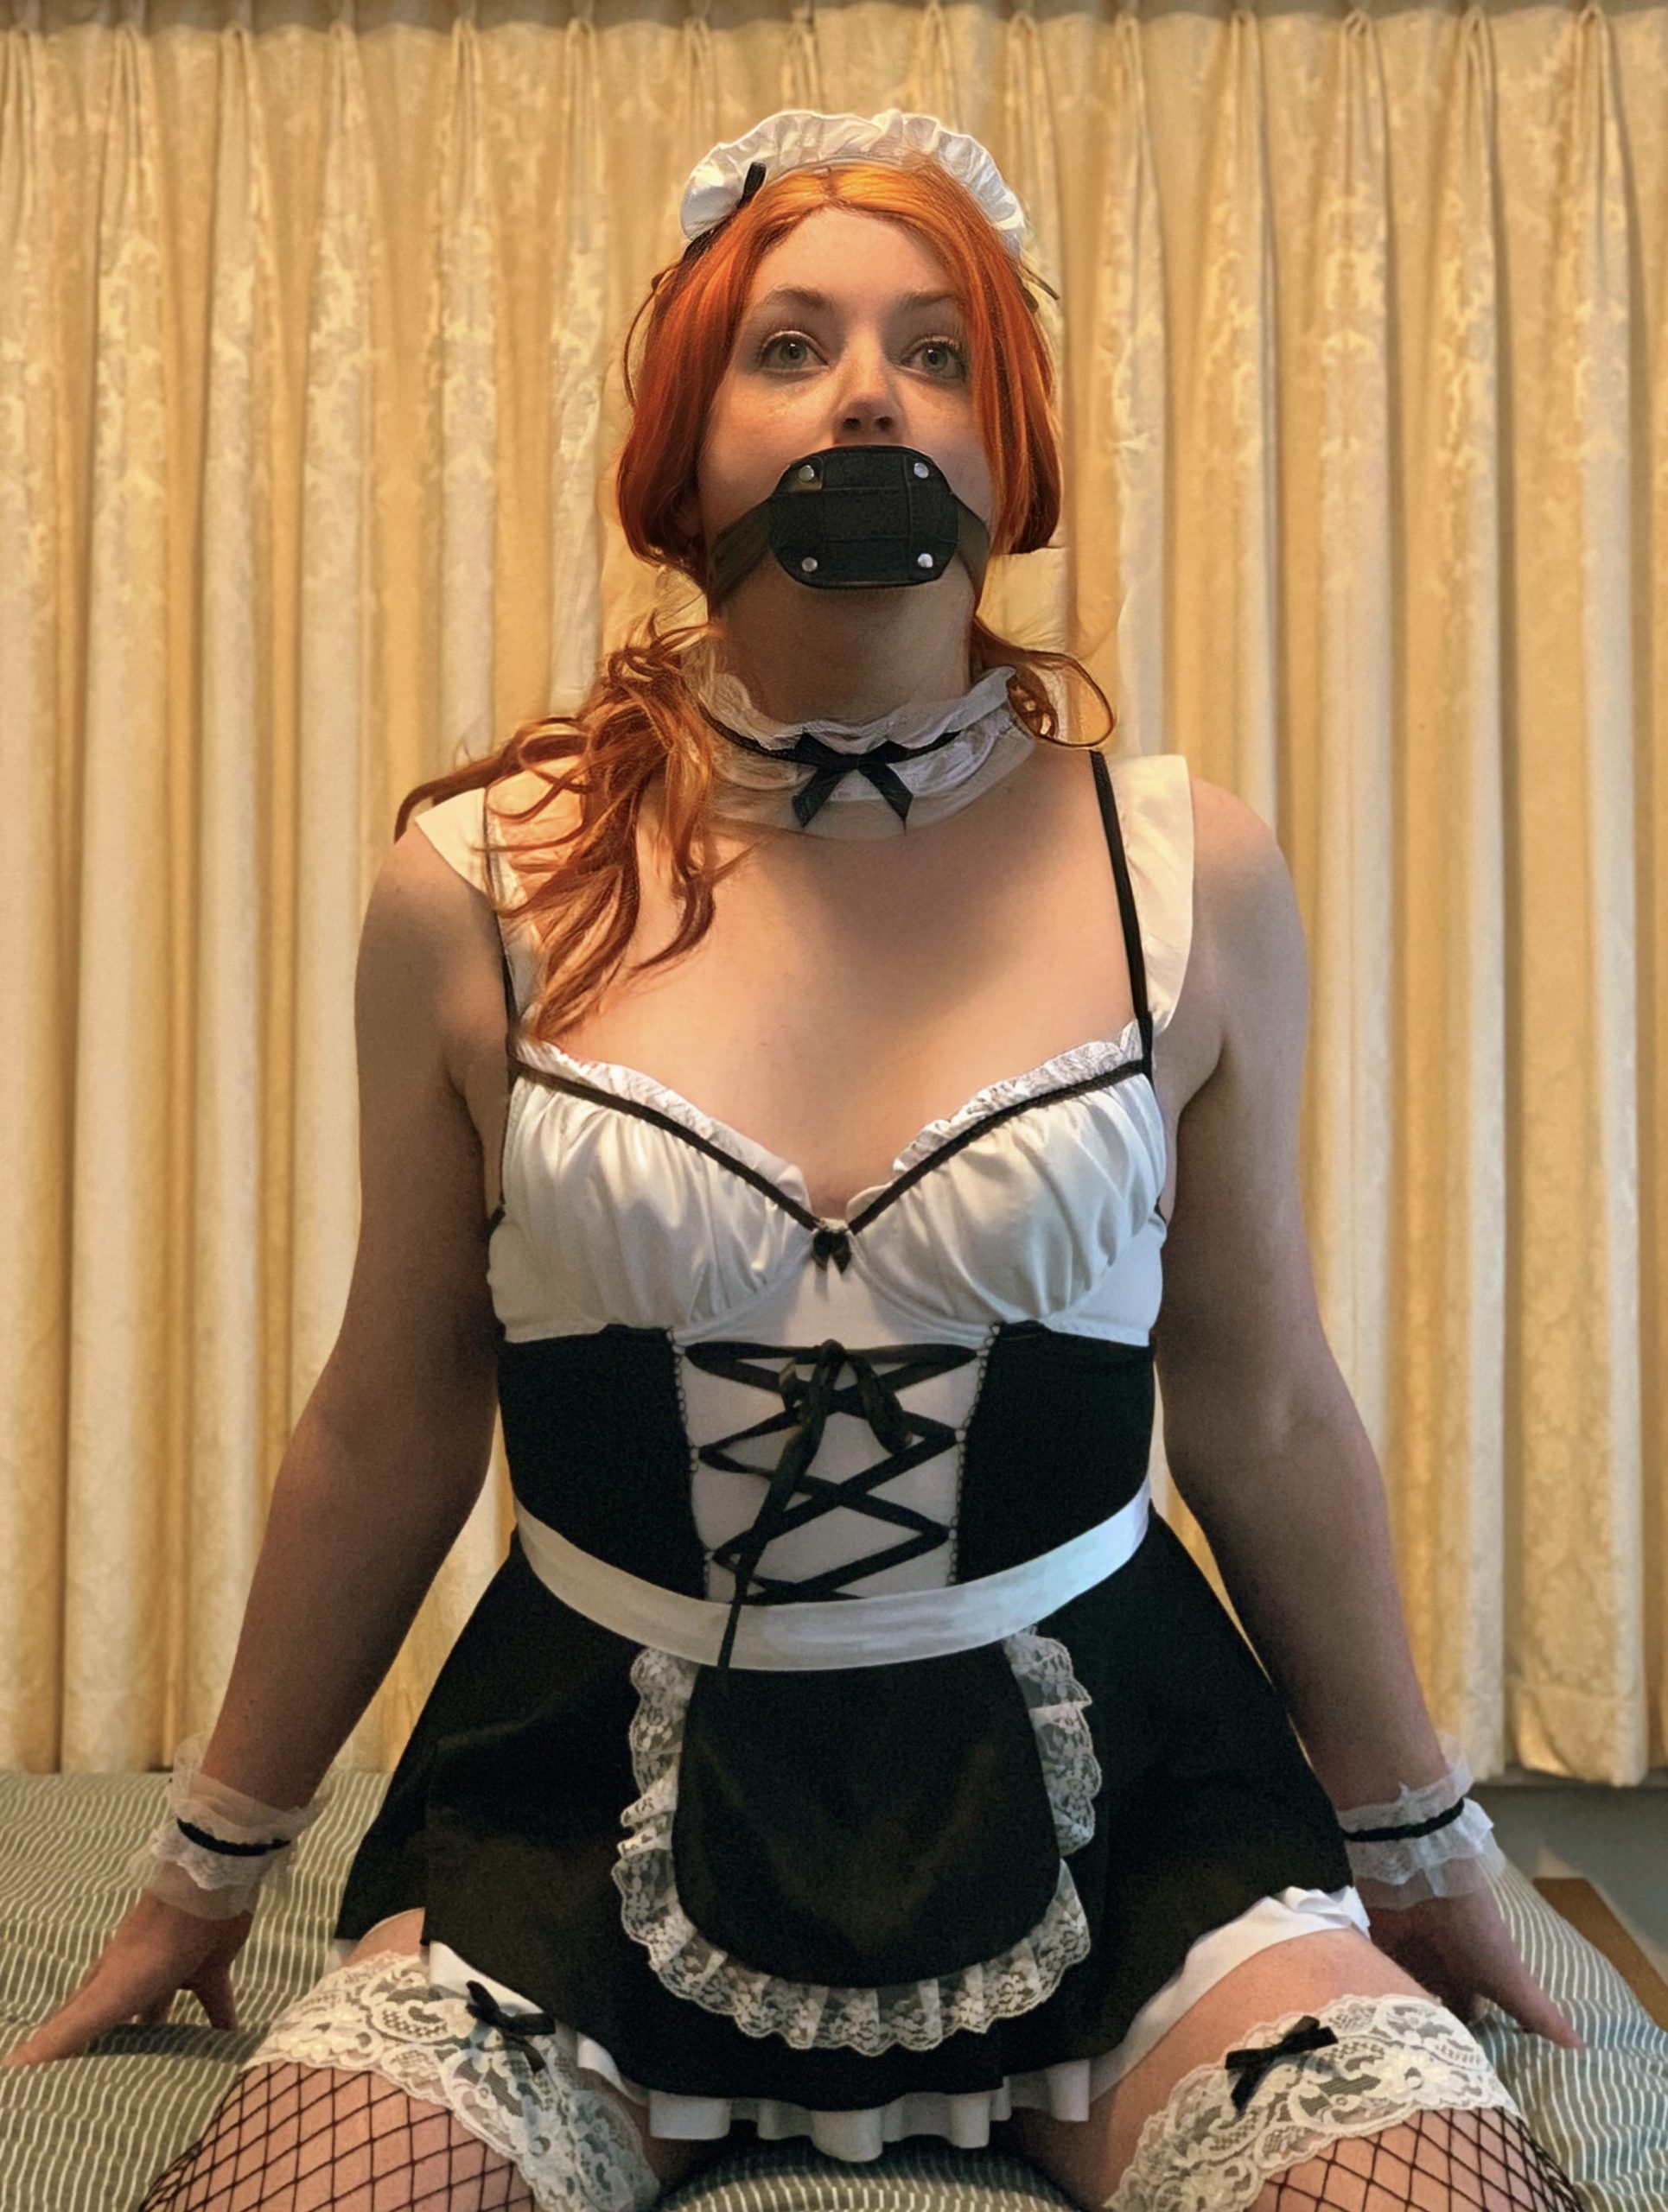 Sissy Maid wh0re – Sissy Sammy always a lovely open hole to fill